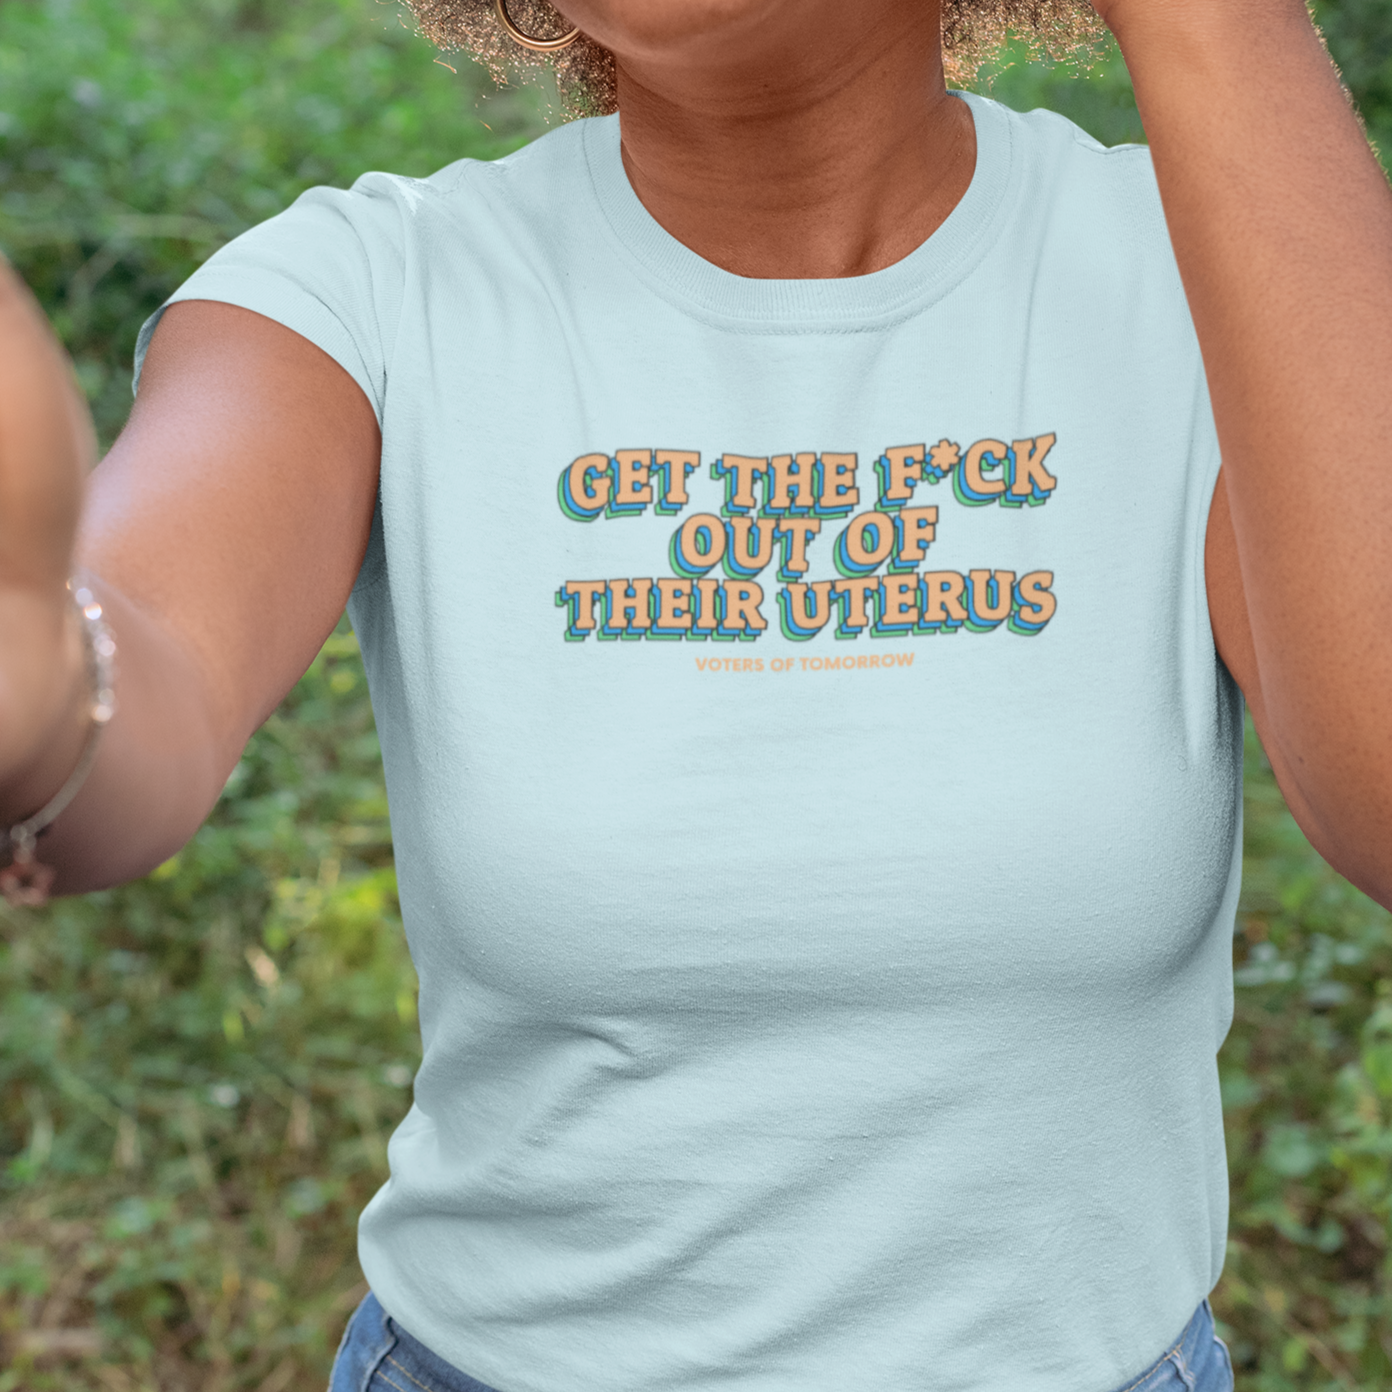 Get the F*ck Out of Their Uterus Tee